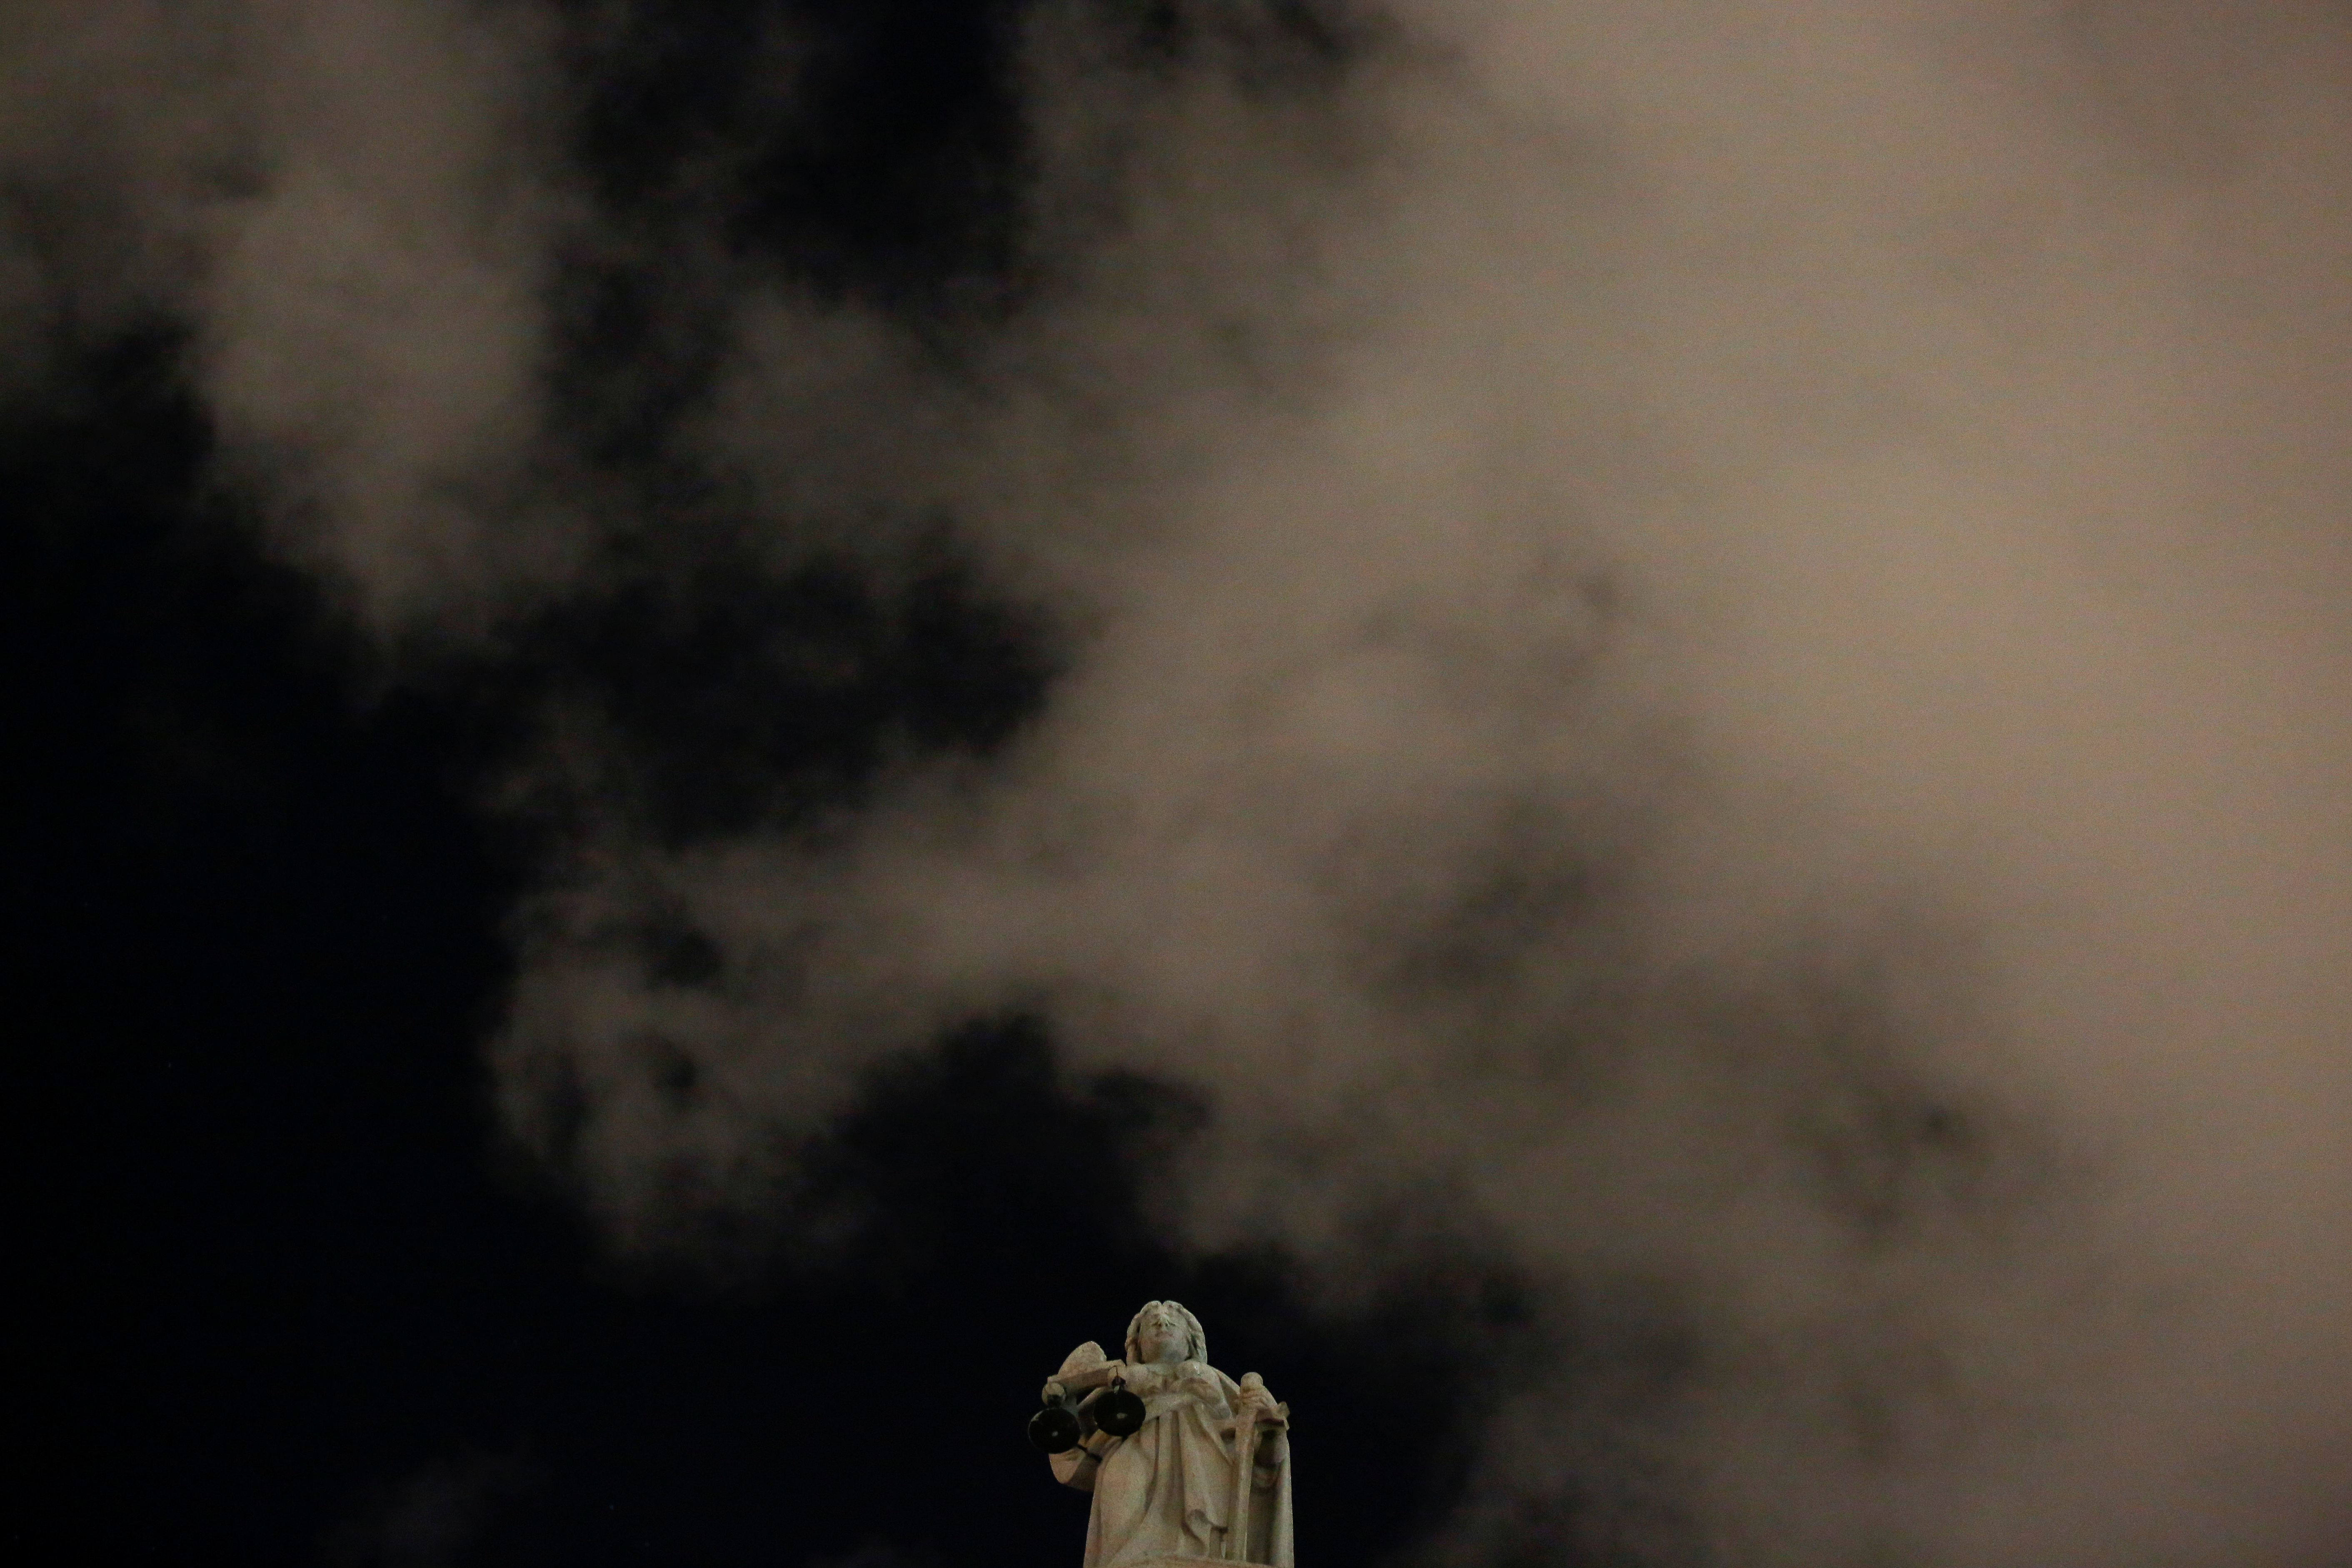 A statue of Lady Justice at the Court of Final Appeal is seen ahead of national security legislation, in Hong Kong